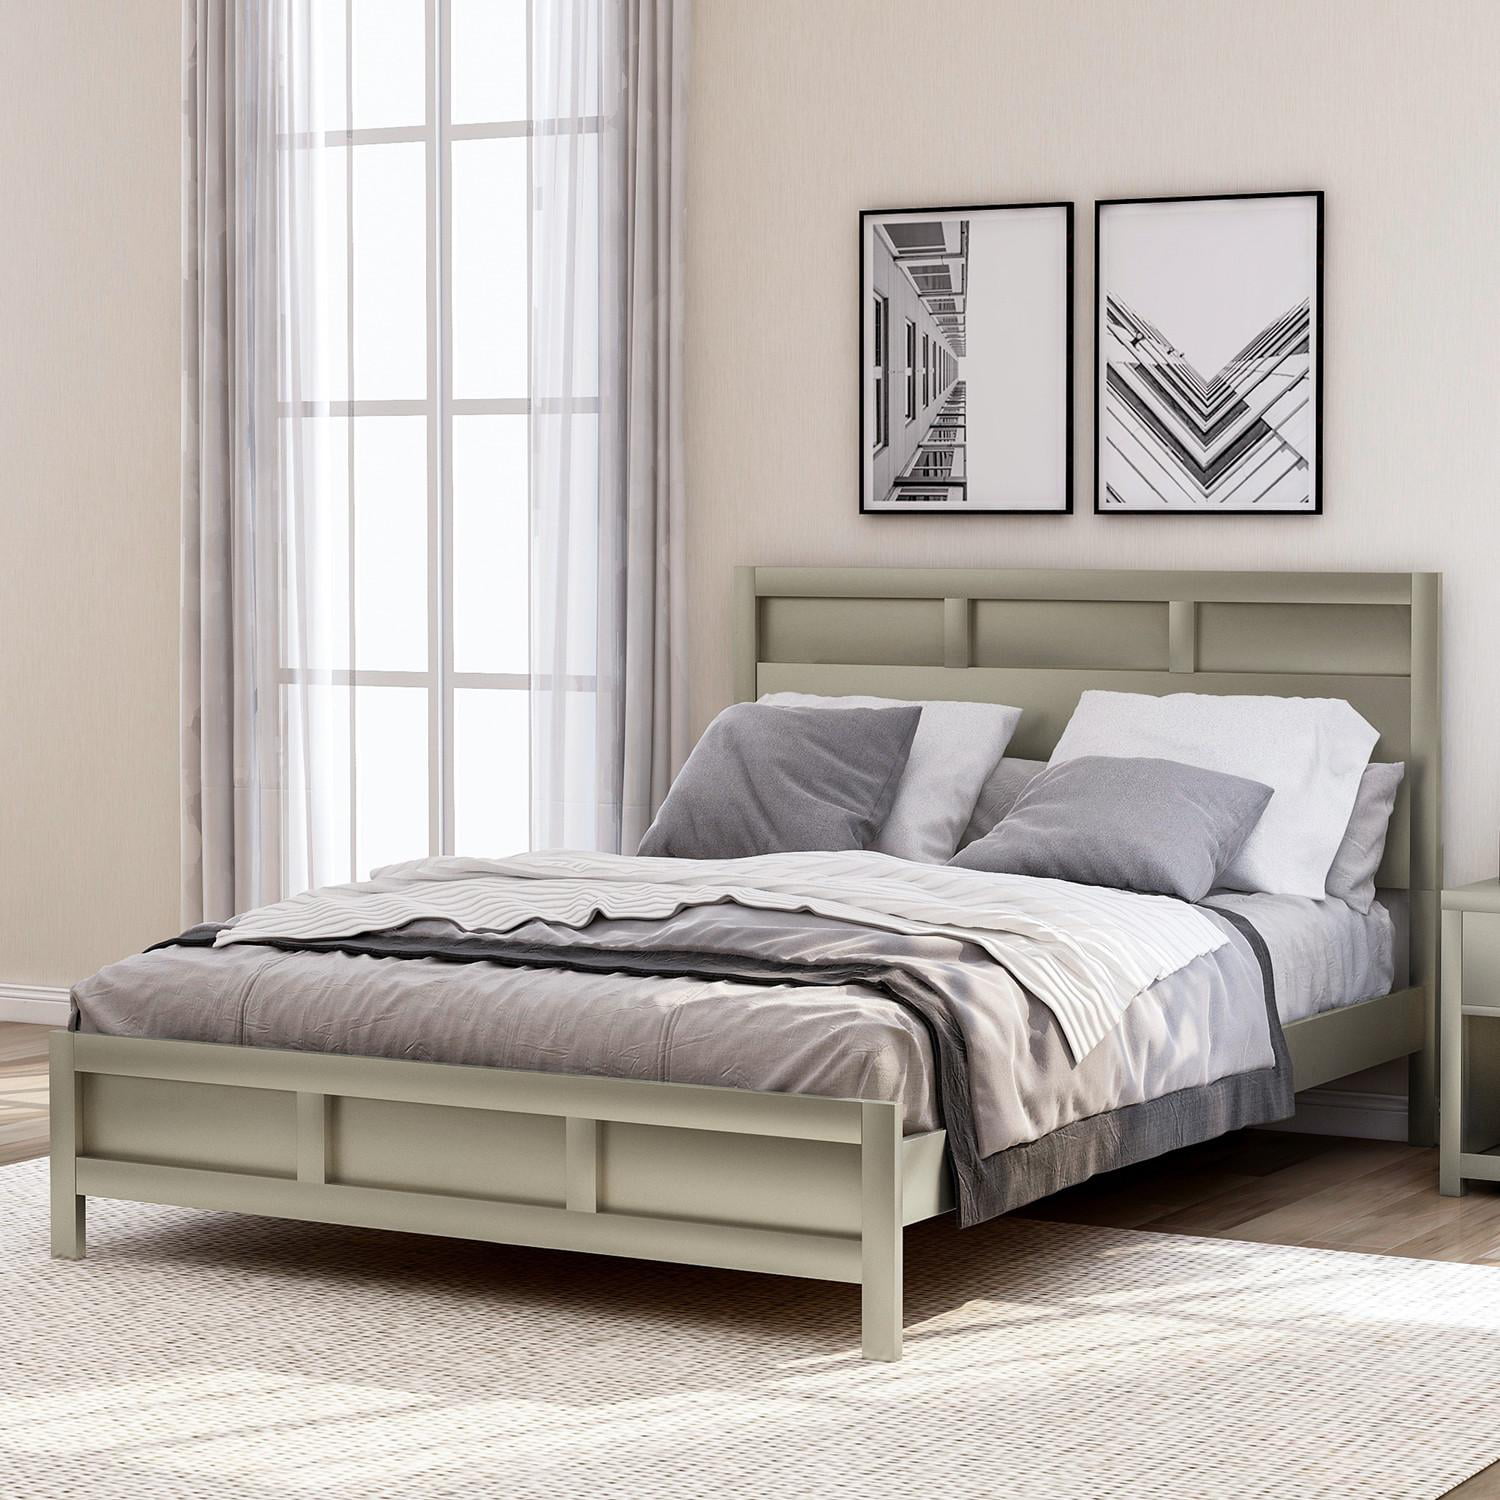 Queen Size Wood Platform Bed Frame with Headboard, No Box Spring Needed